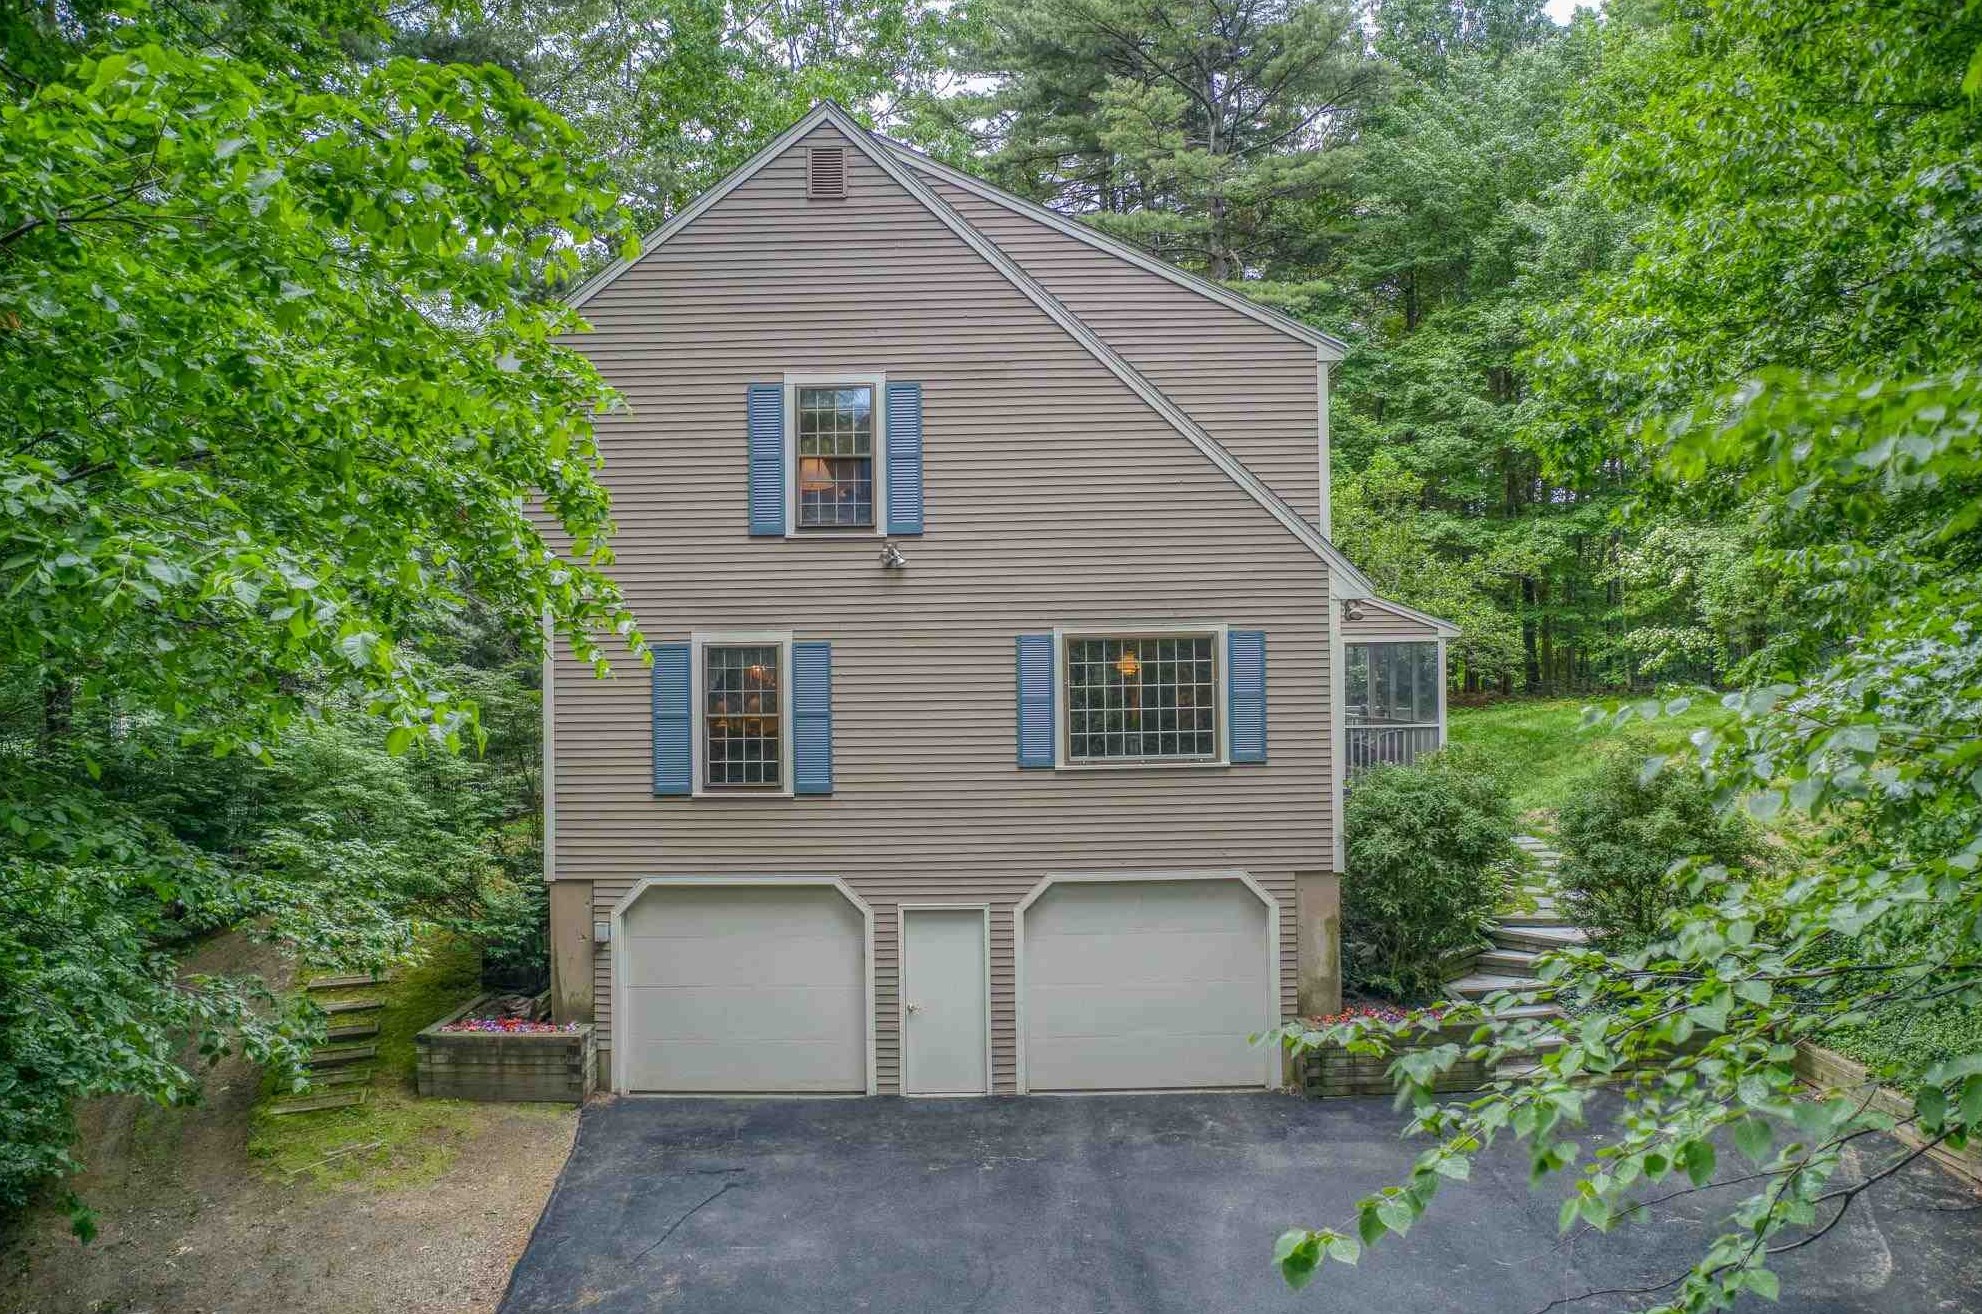 13 Heritage Hill Rd, Windham, NH 03087